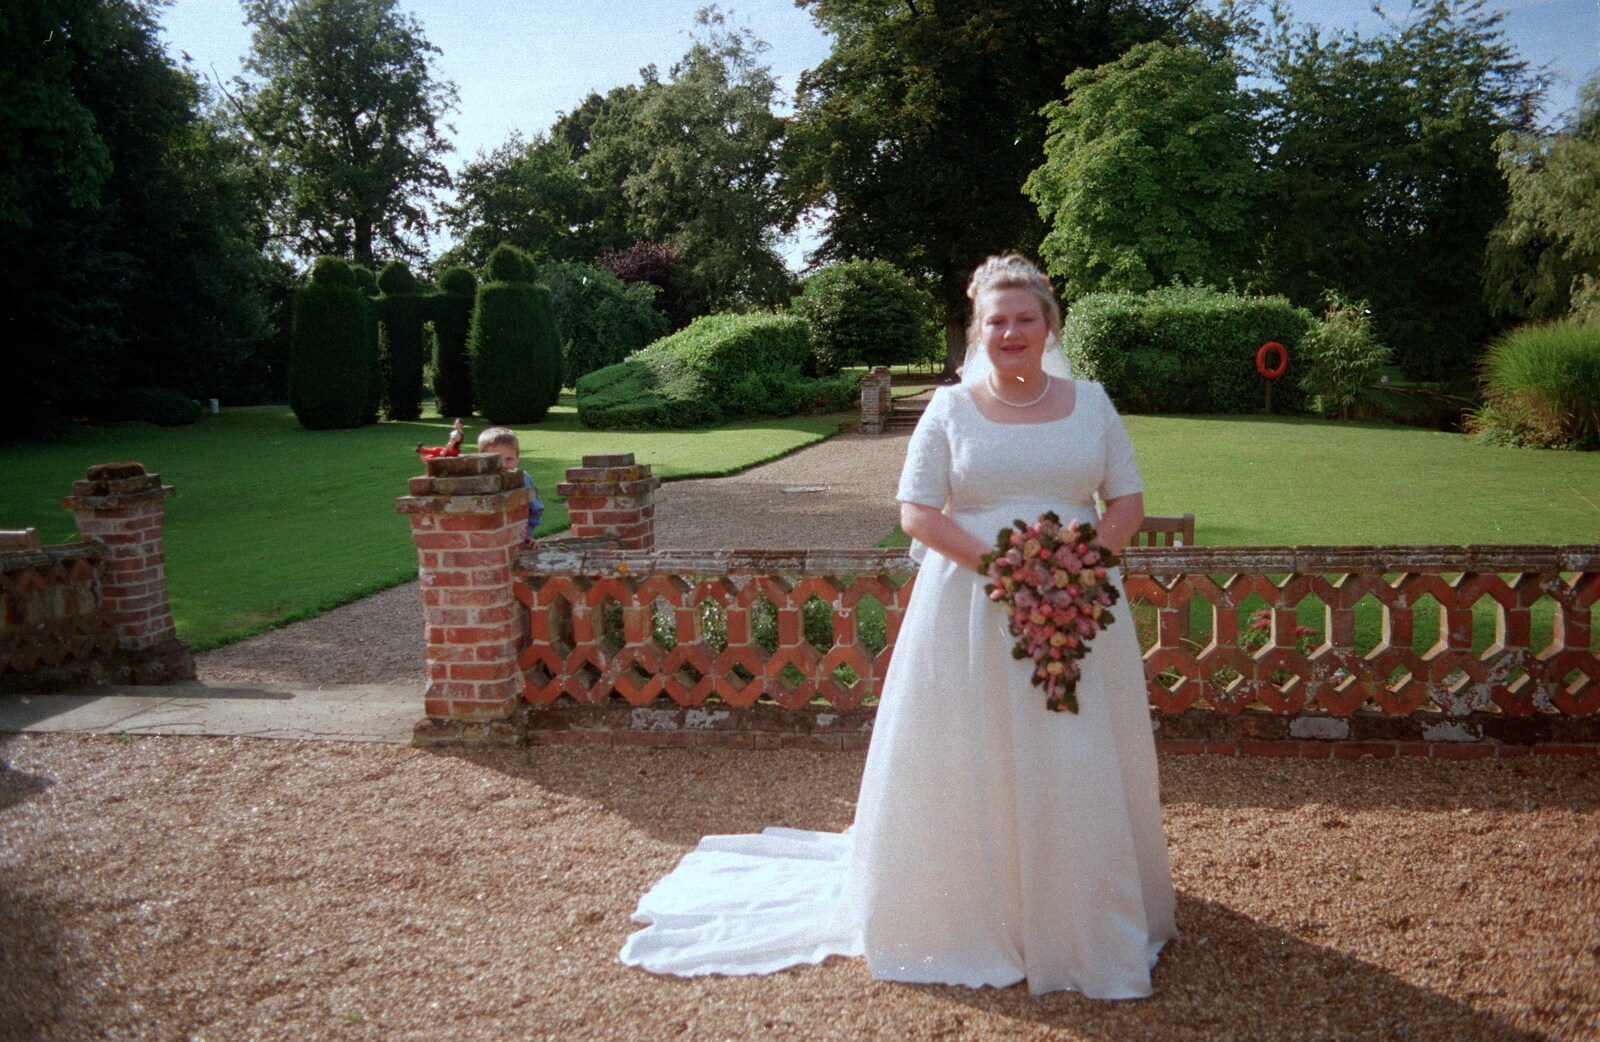 Helen with bouquet from Helen and Neil's Wedding, The Oaksmere, Brome, Suffolk - 4th August 2000